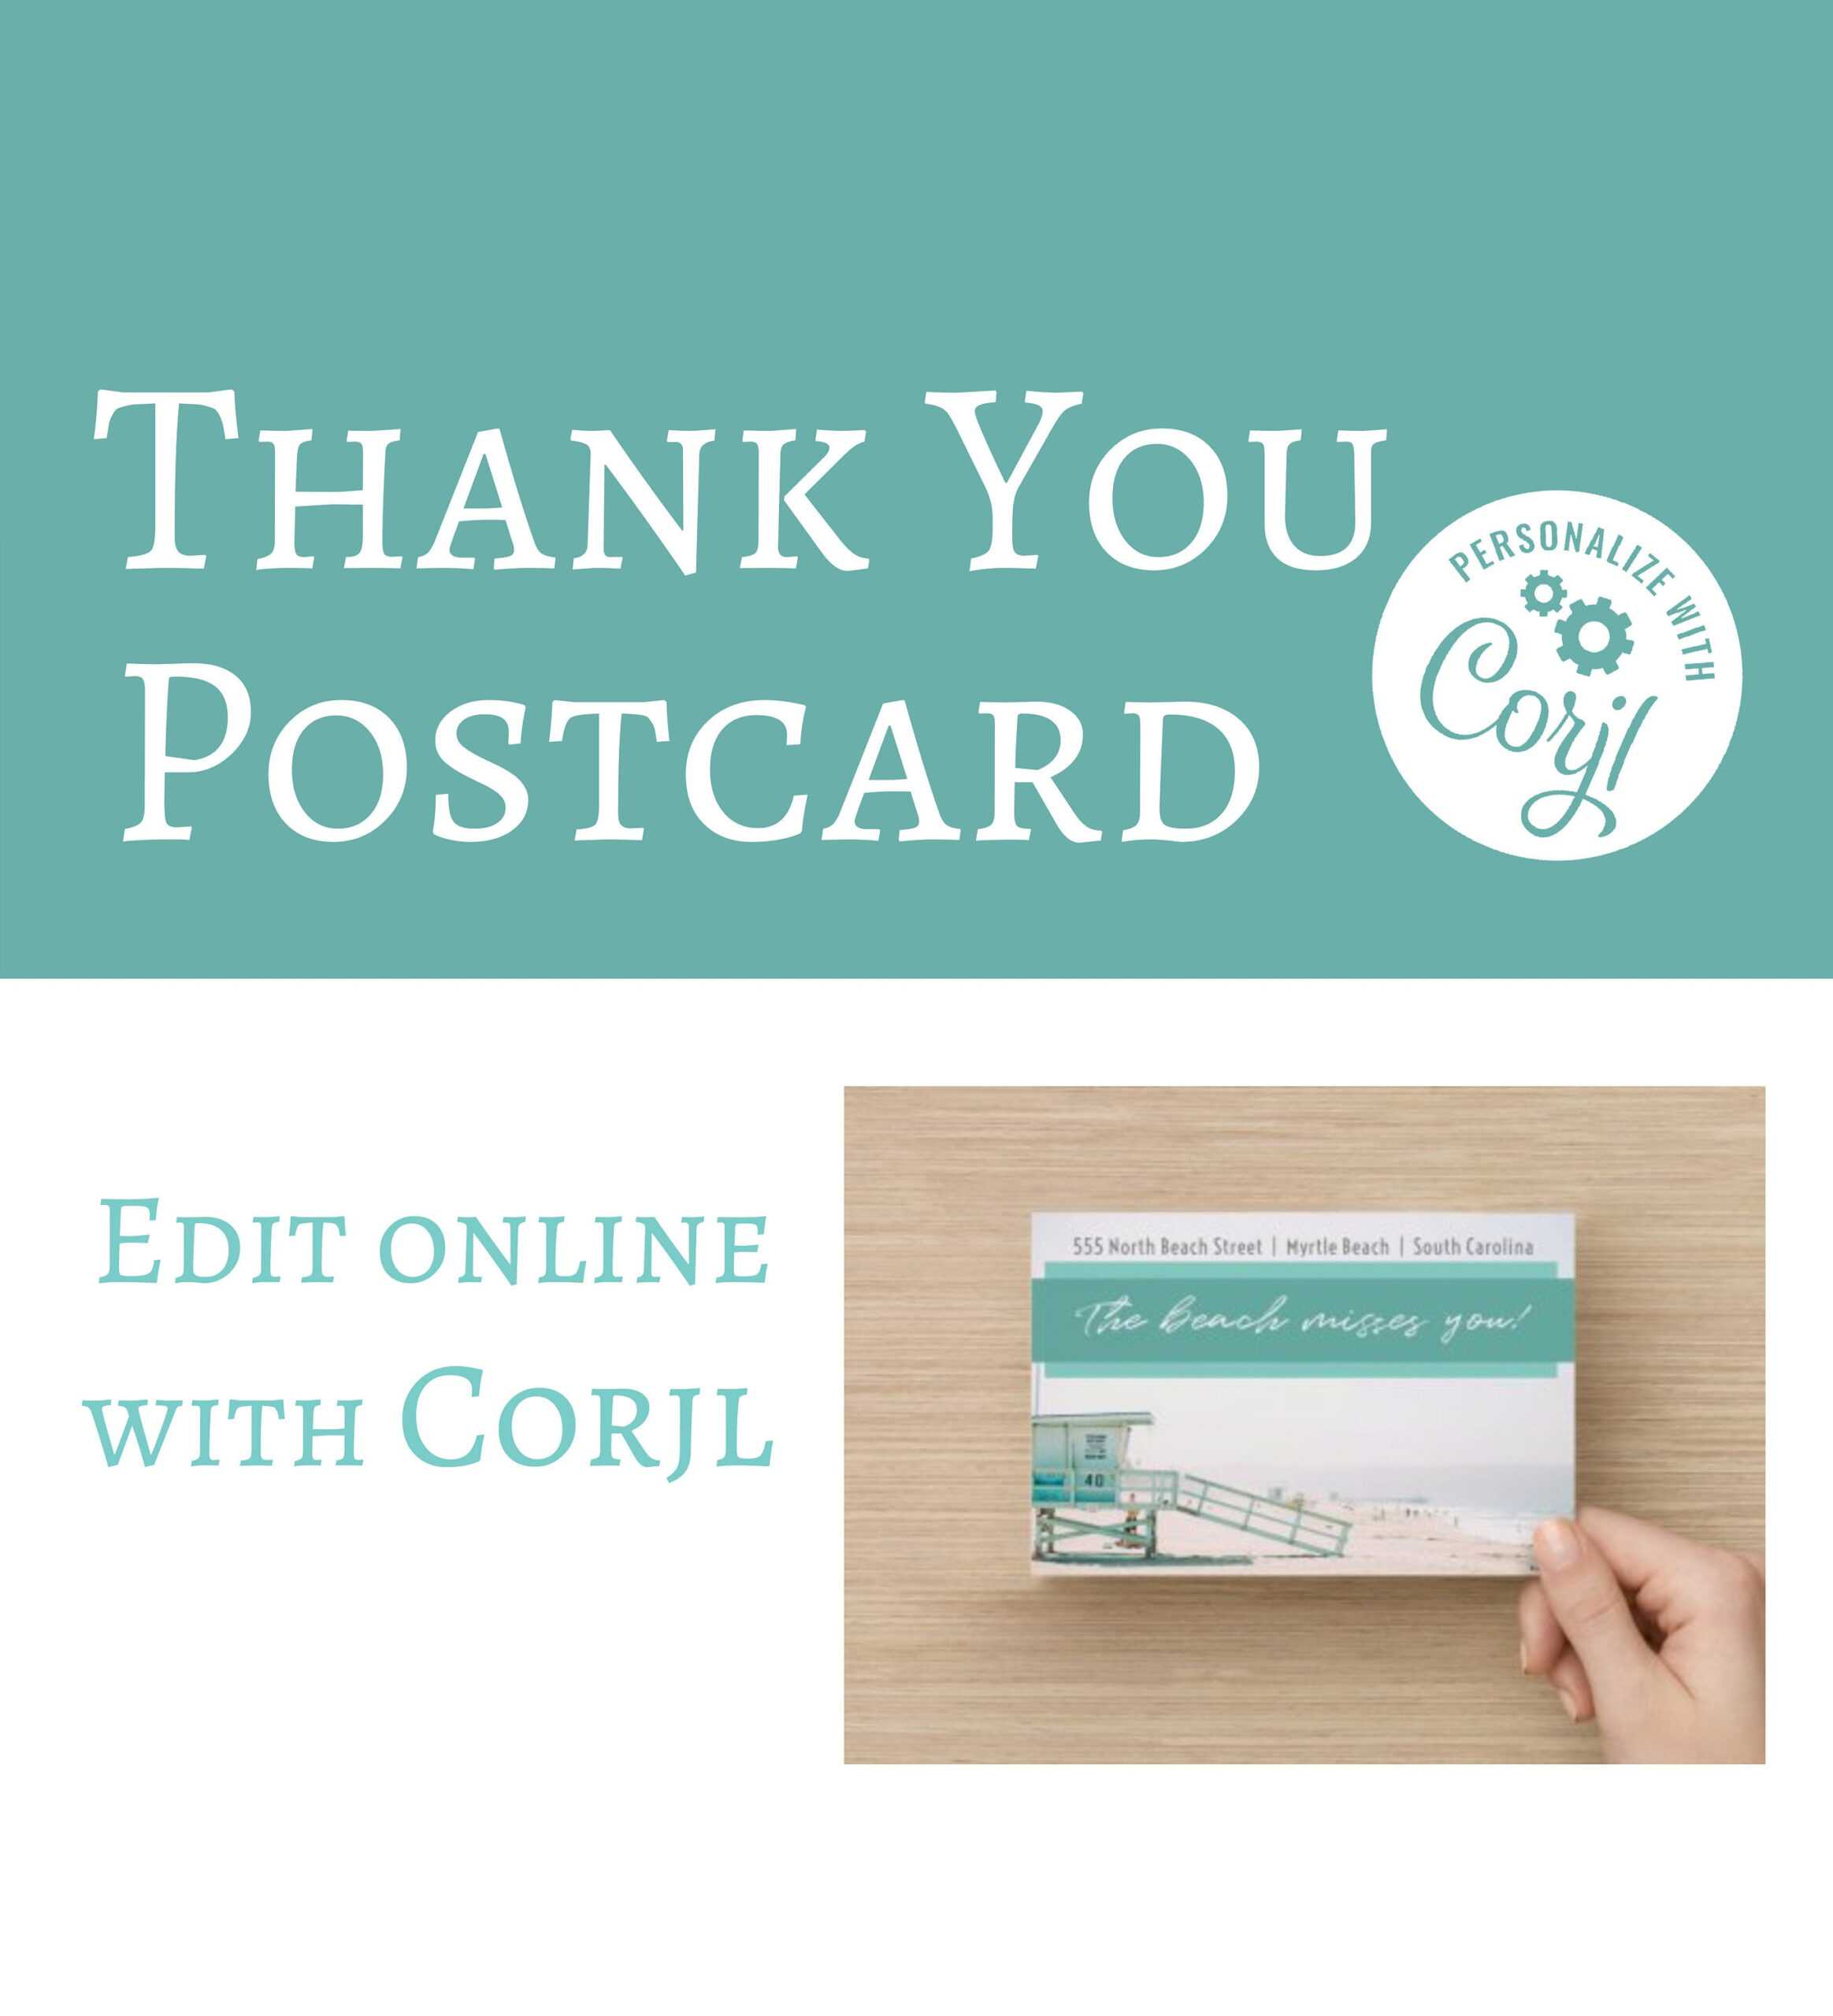 006 Template Ideas Post Card Thank You Remarkable Postcard For Free Thank You Postcard Template